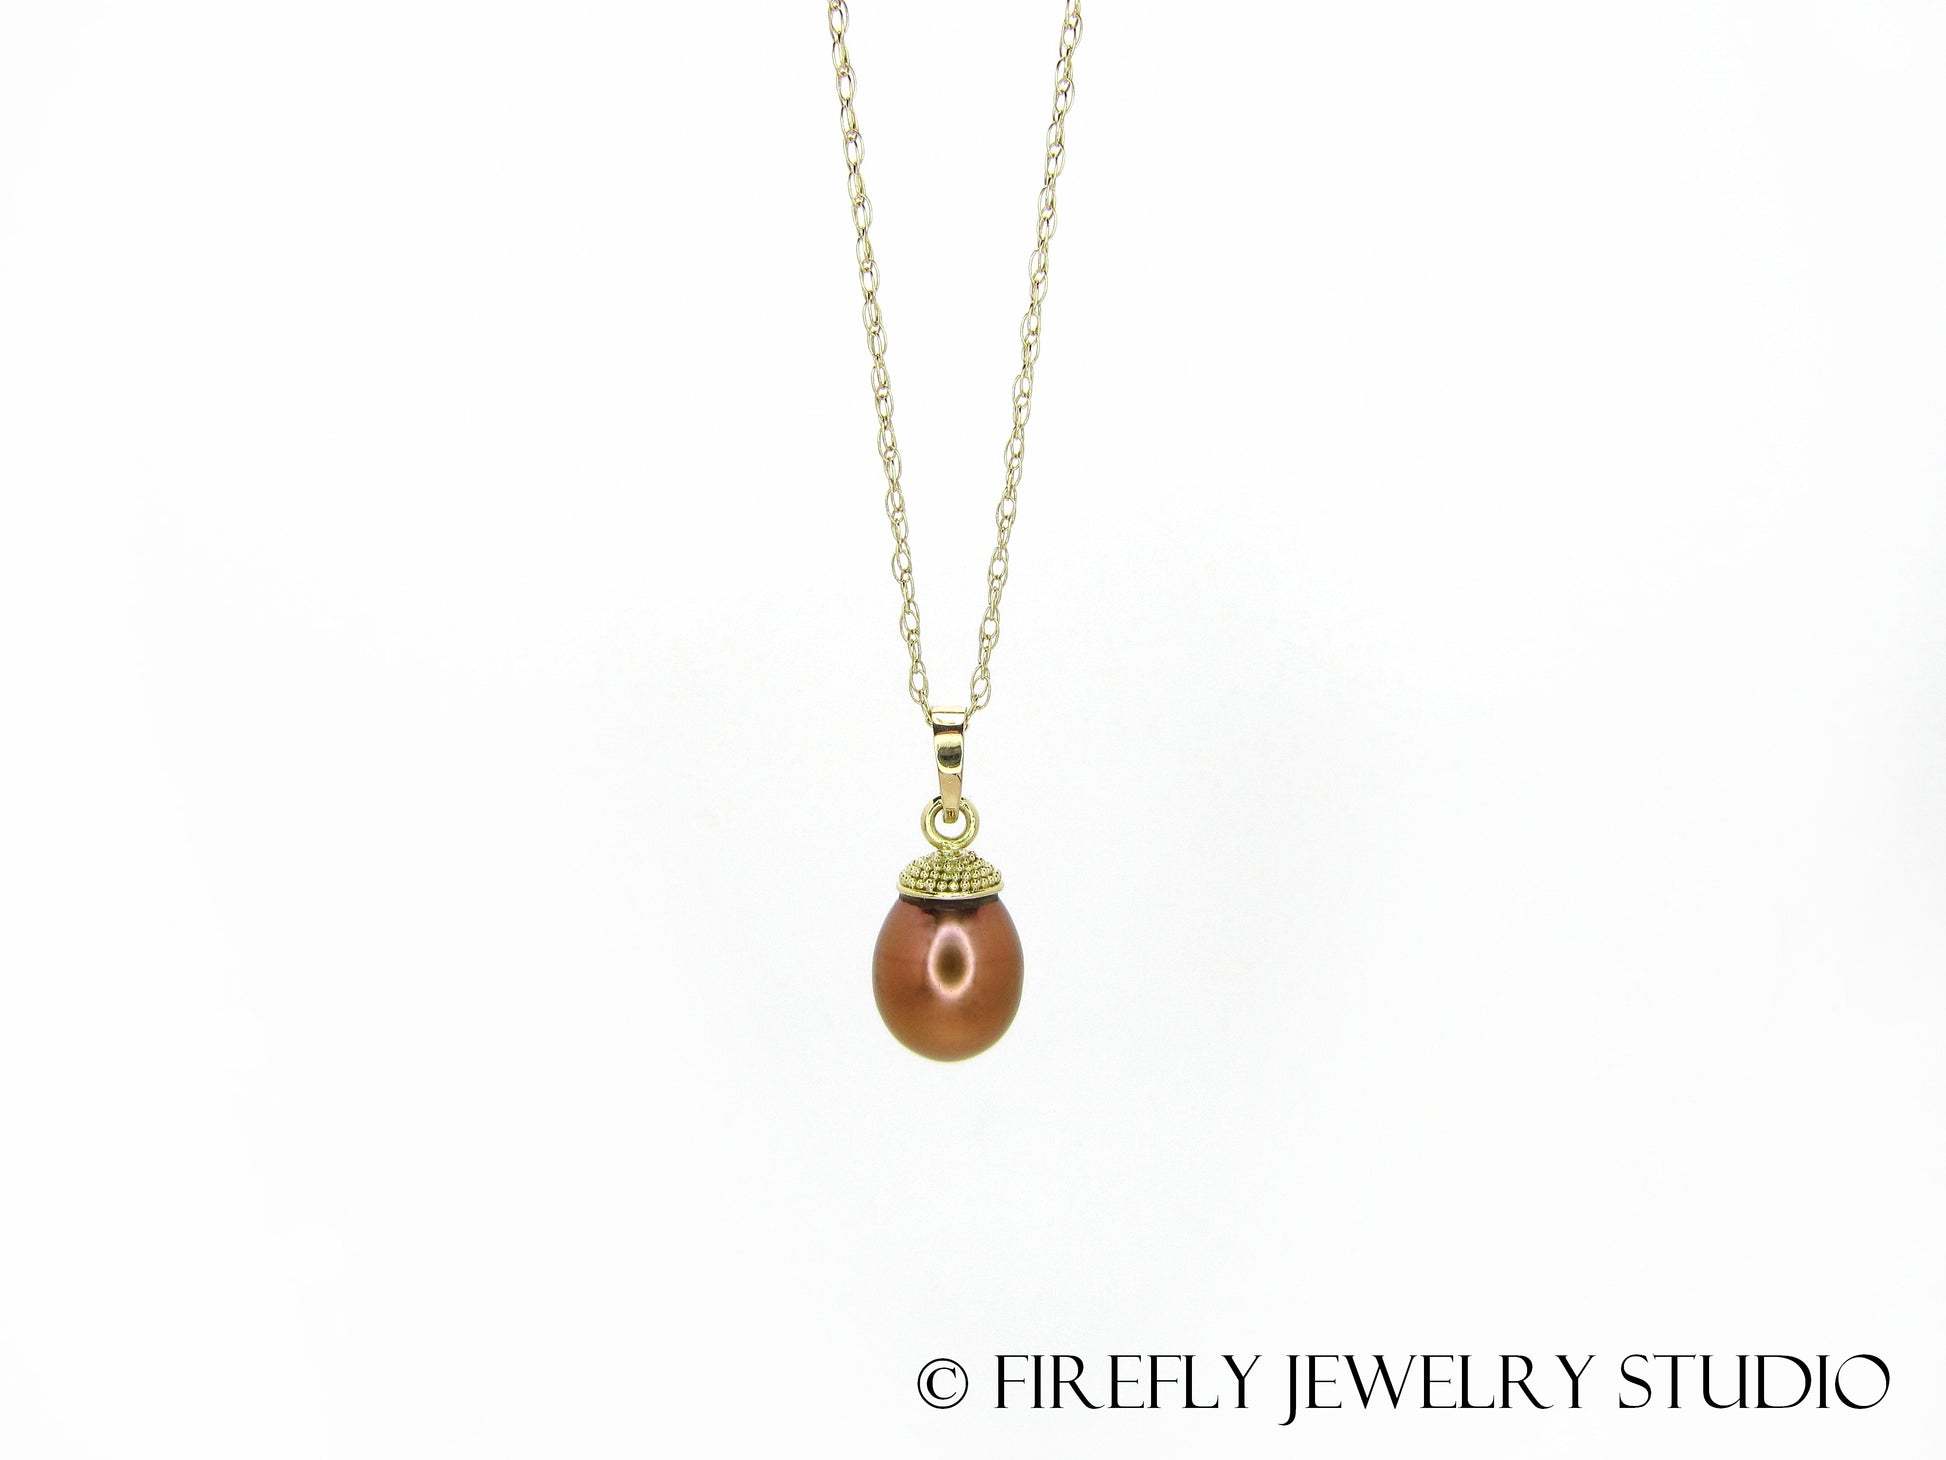 Copper Pearl Acorn Necklace in 18k Yellow Gold - Firefly Jewelry Studio